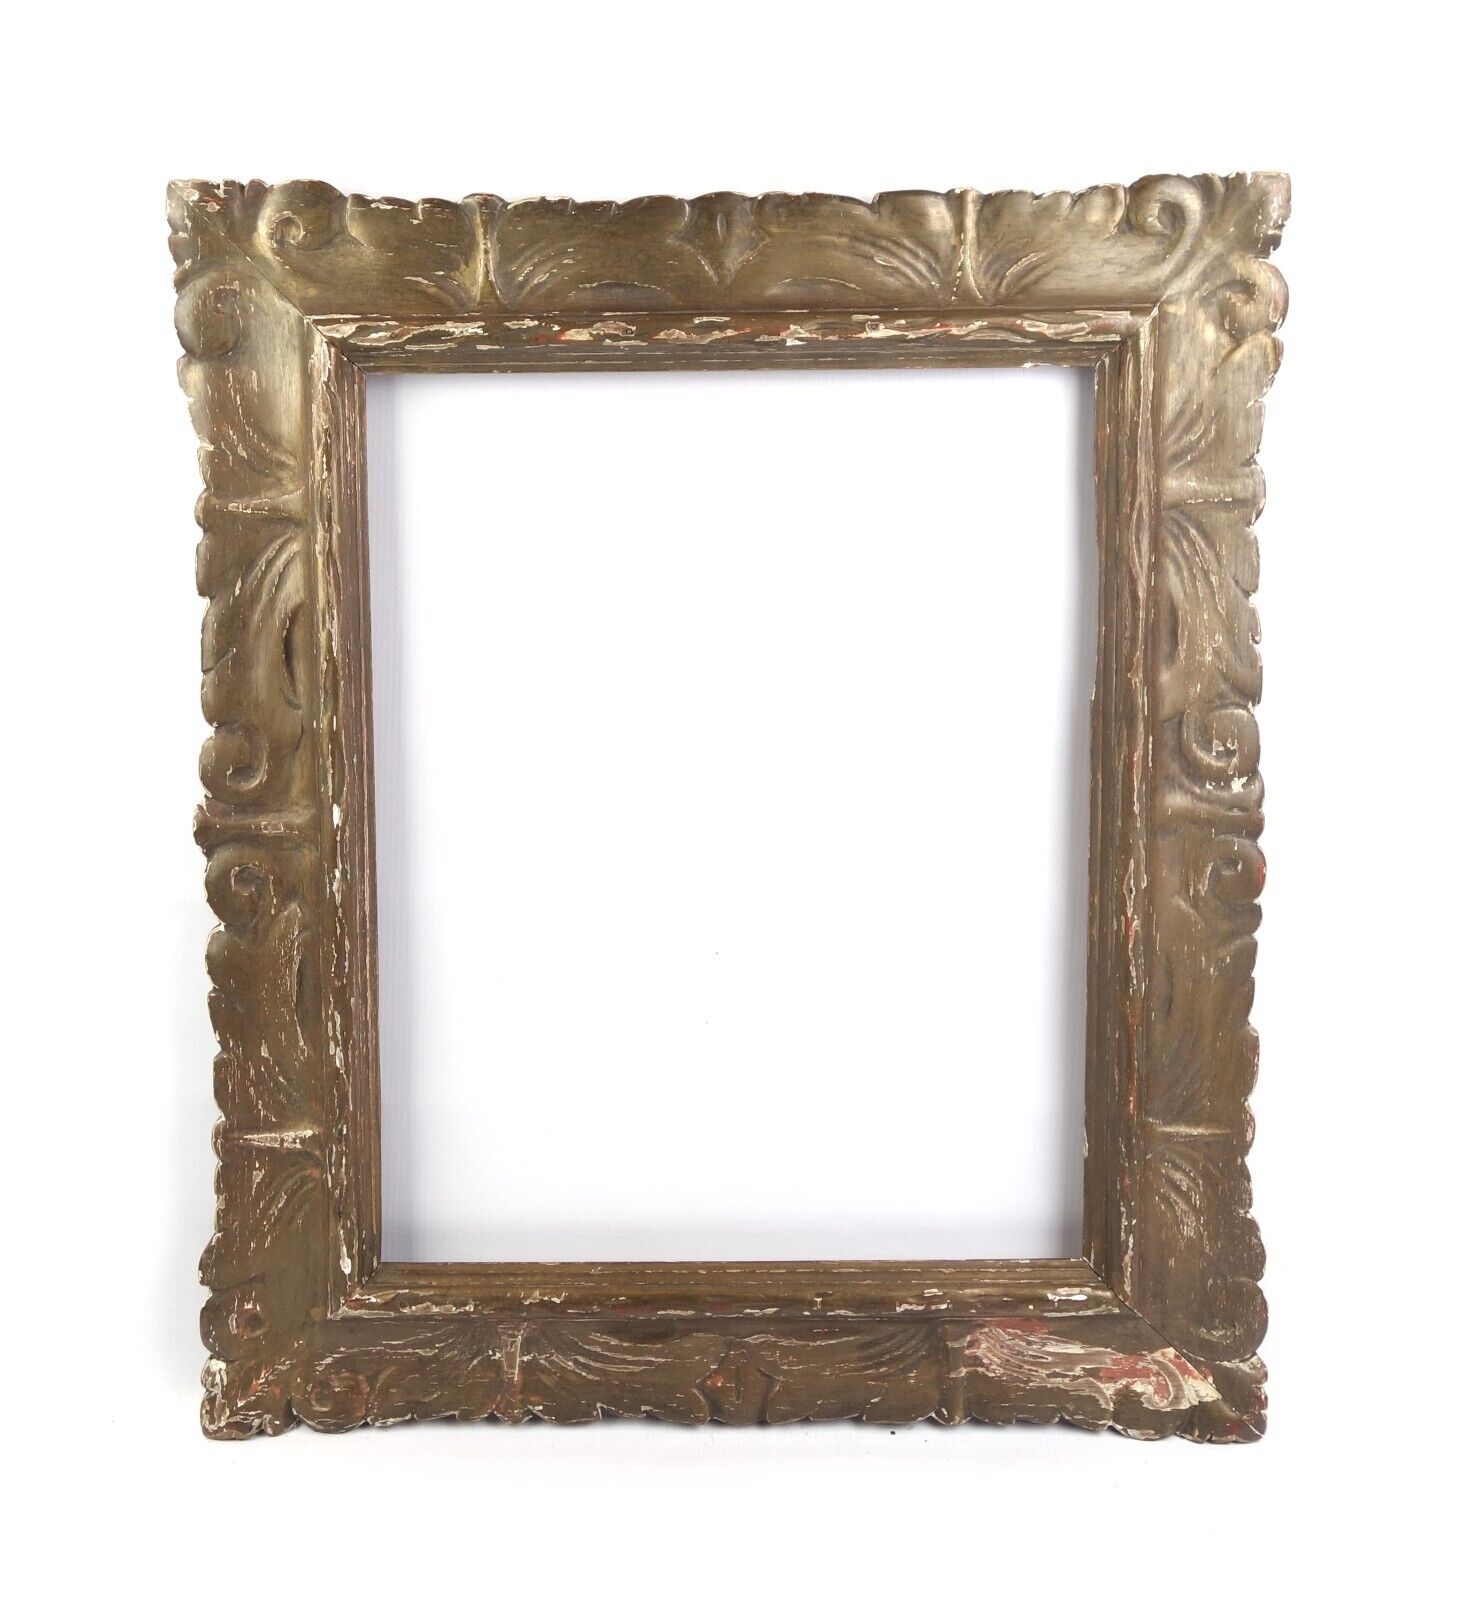 Antique 19th C Ornate Victorian Gold Painted Gesso Picture Frame Fits 15x12